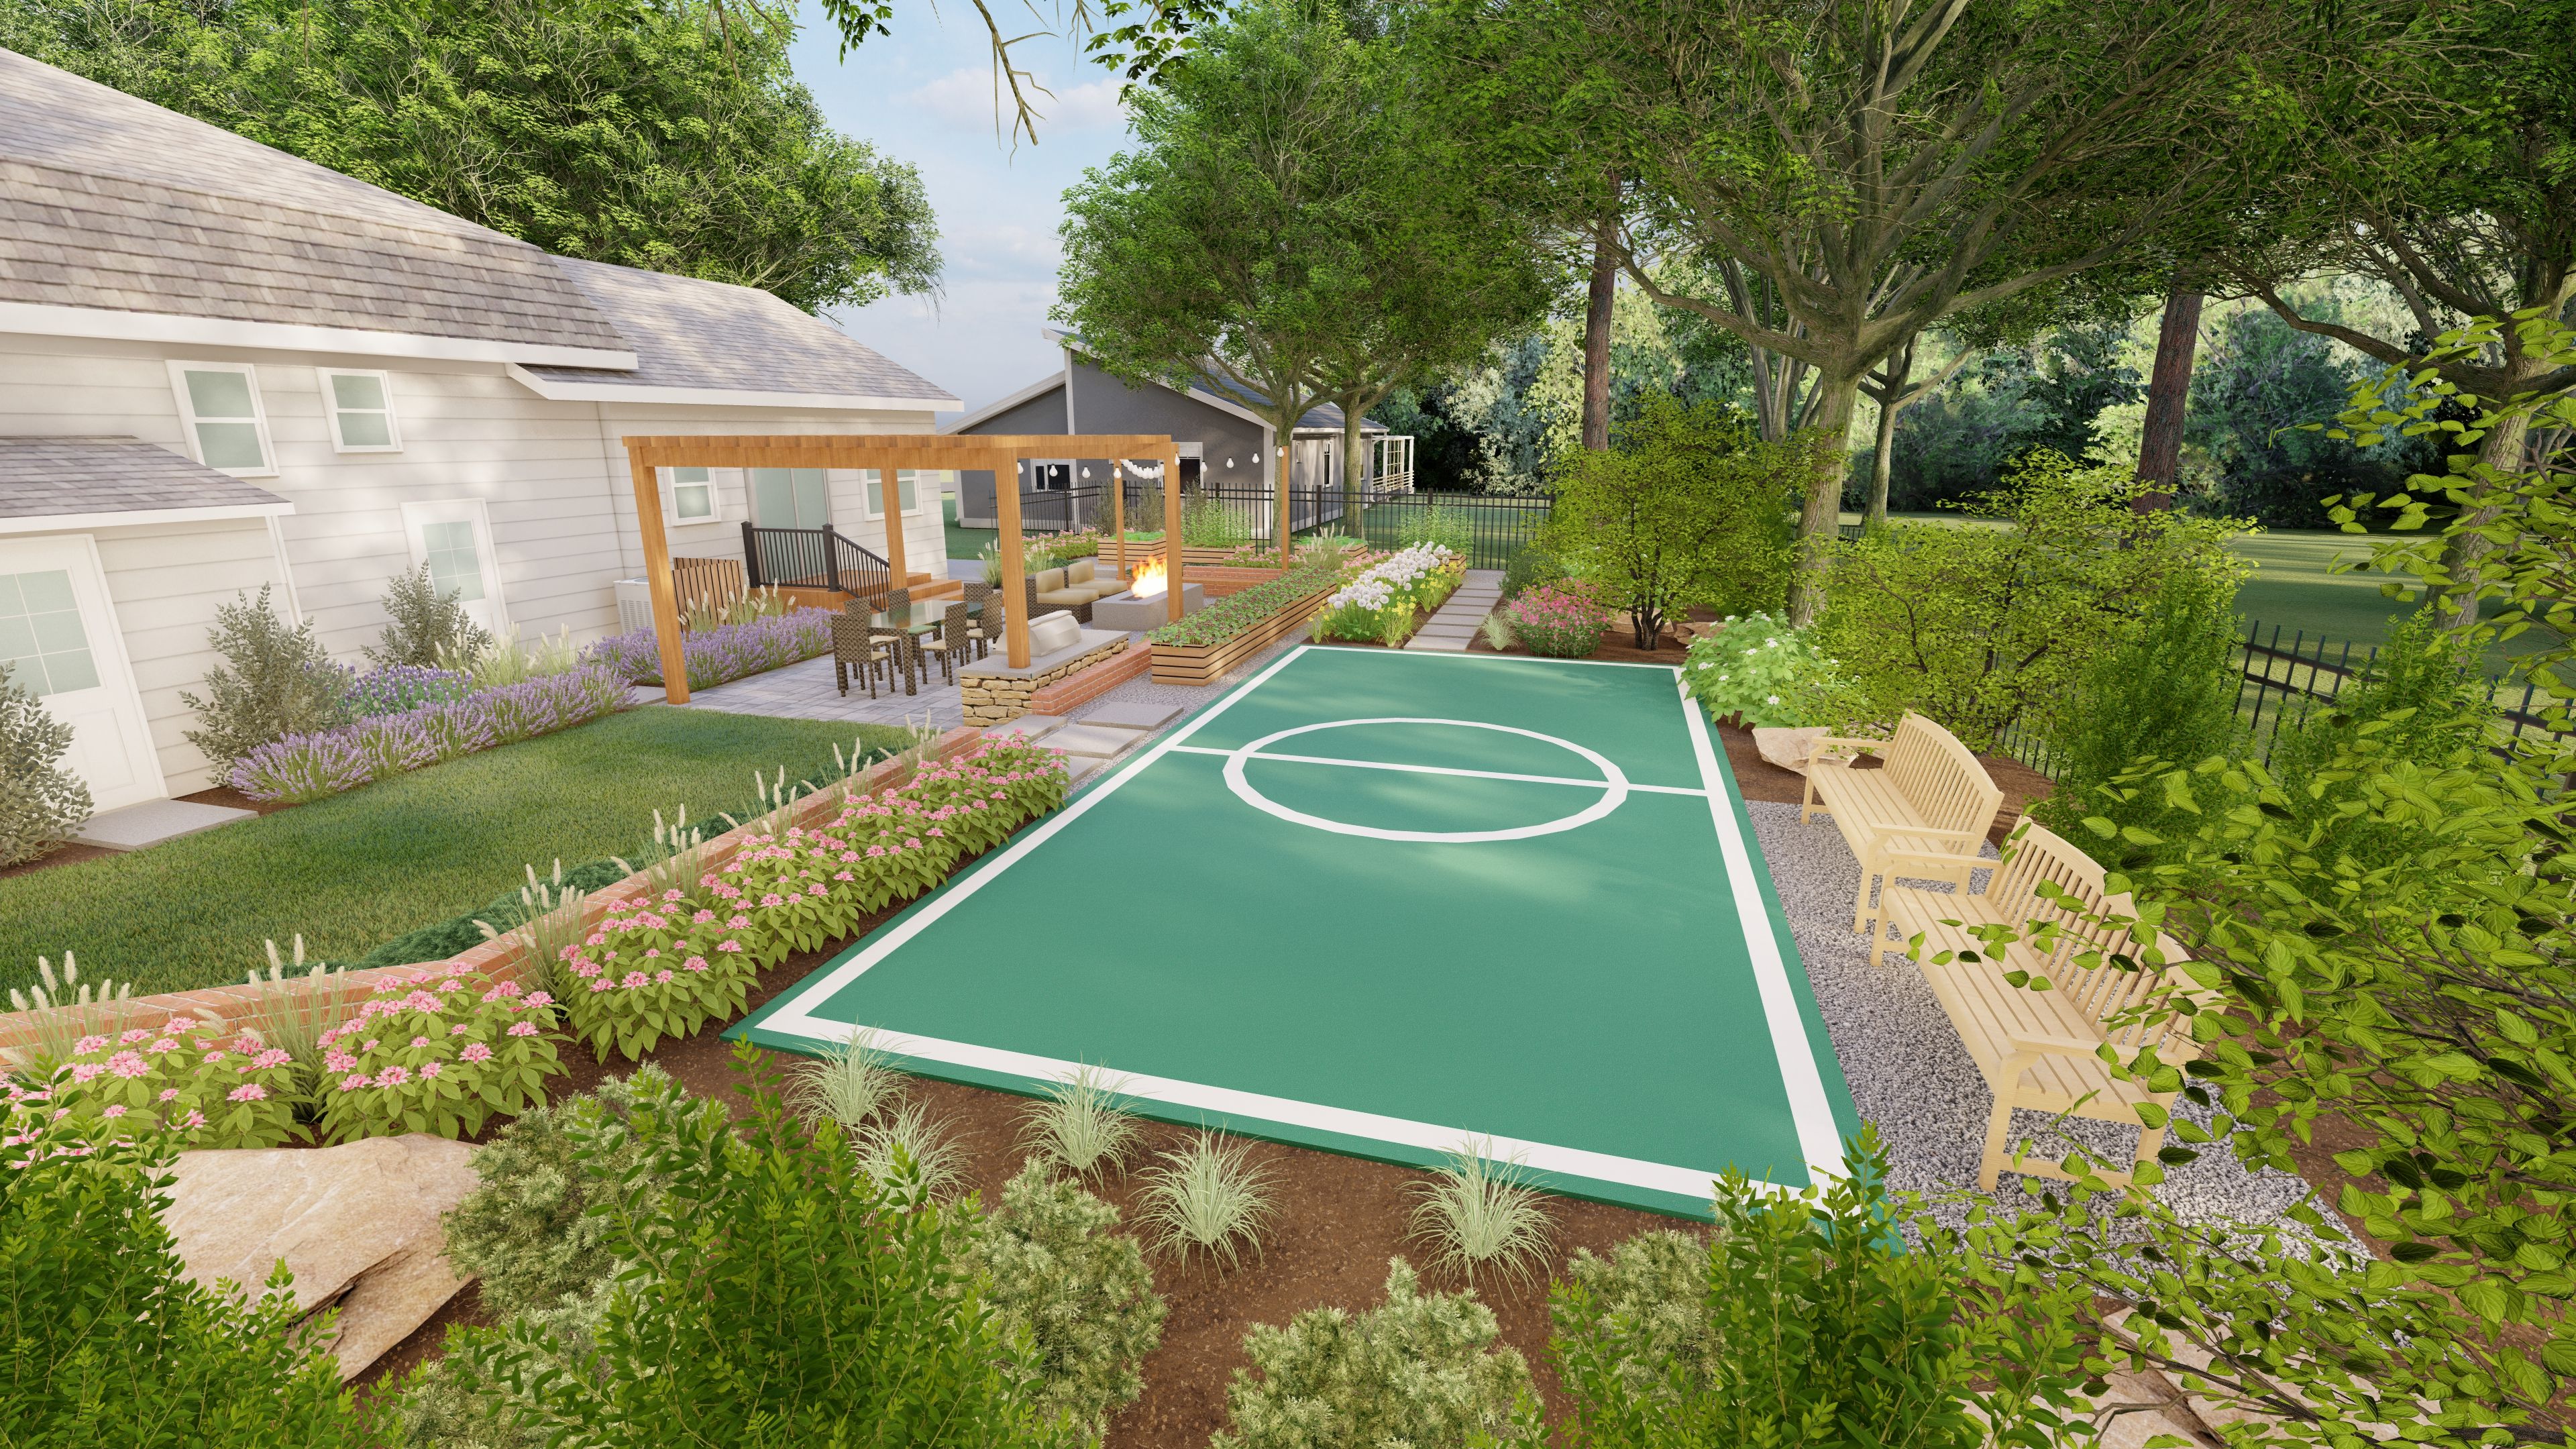 a backyard landscaping idea with a sports court and dining area was well as outdoor seating areas